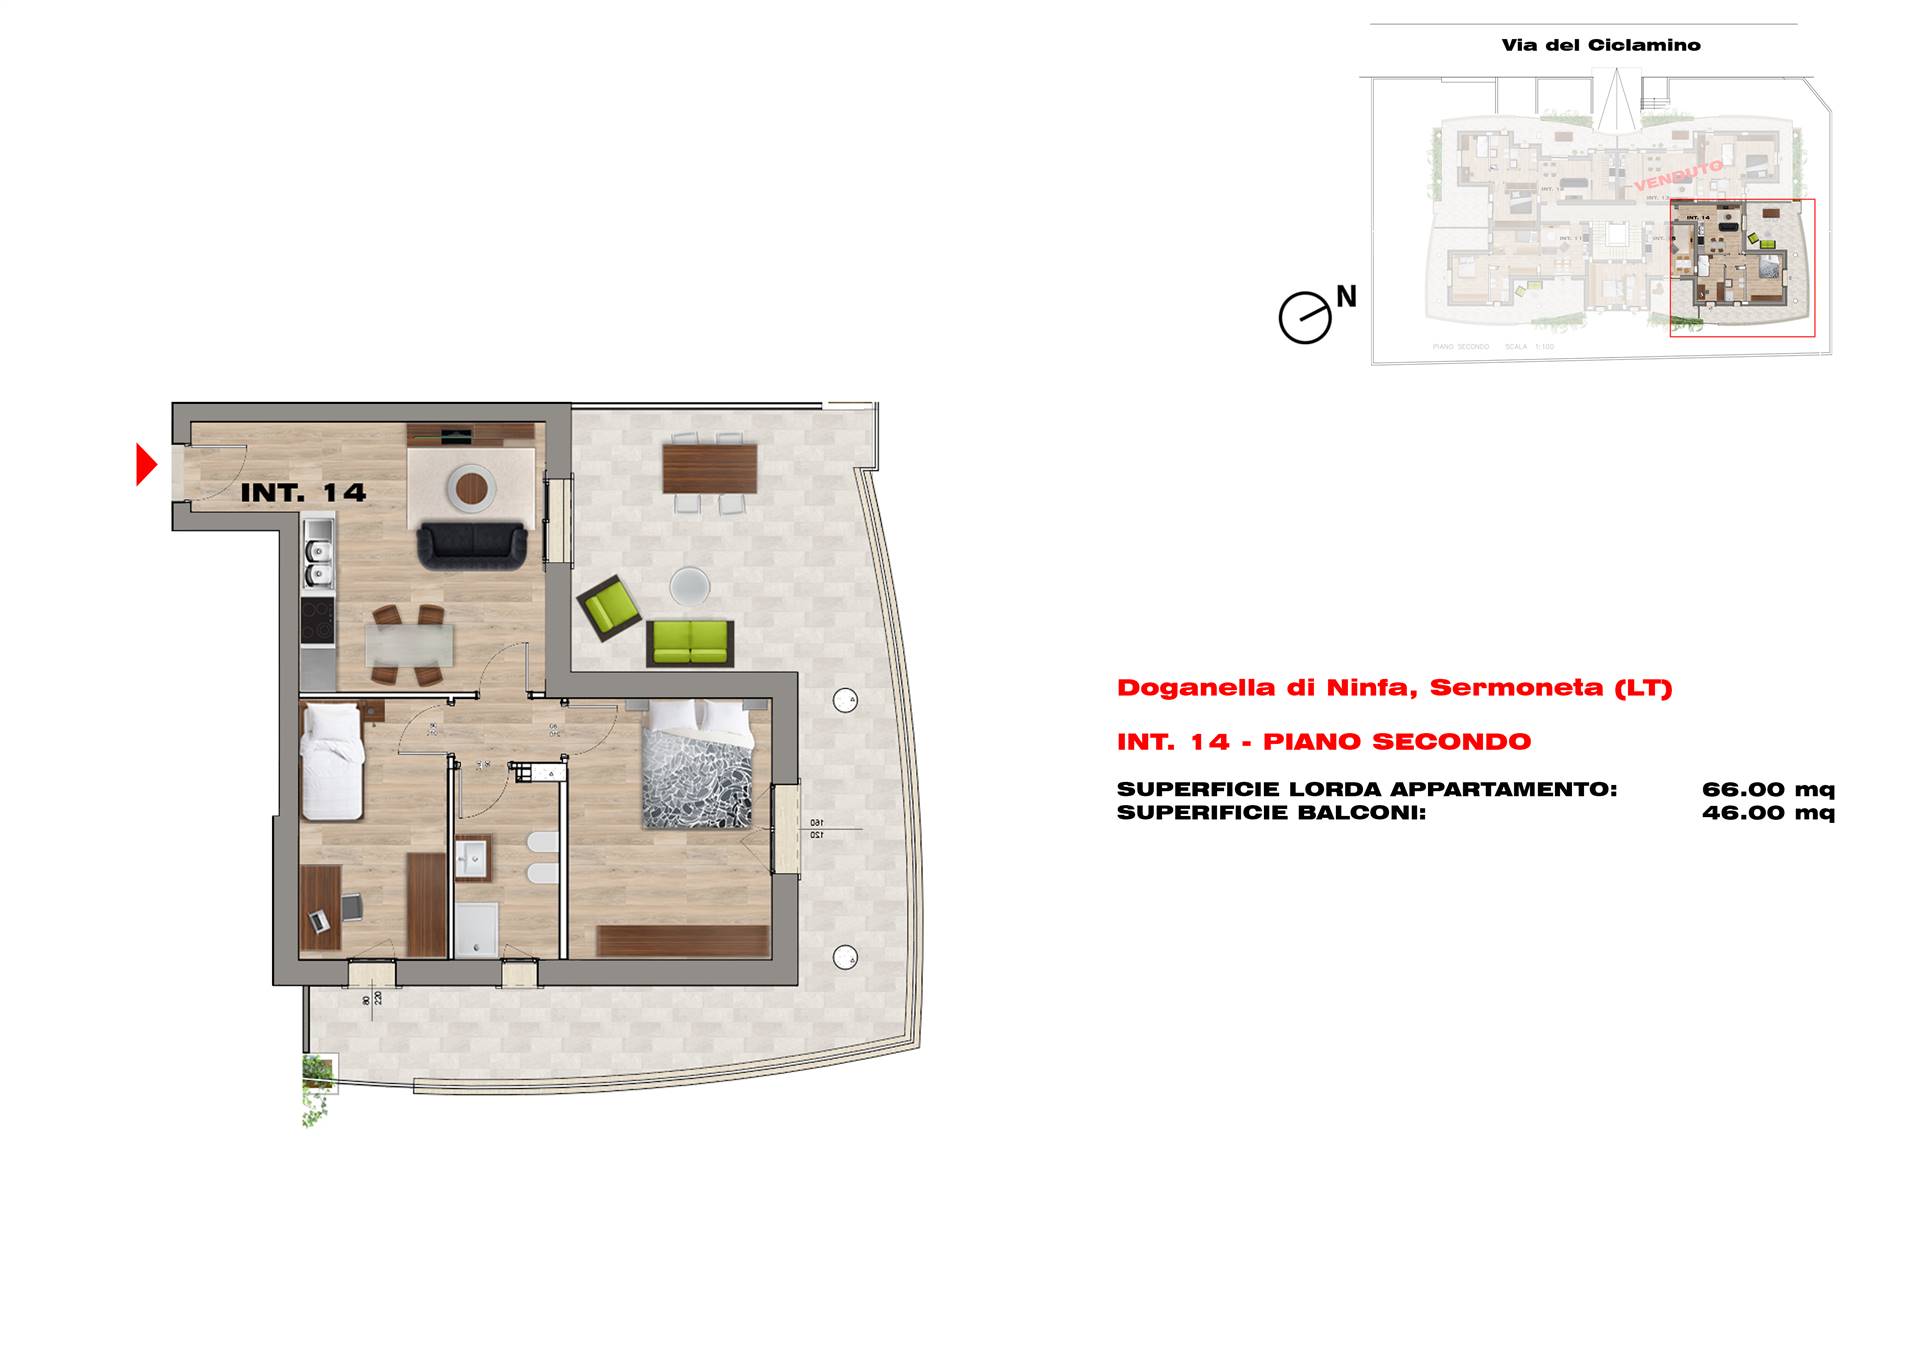 BIVIO DI DOGANELLA, SERMONETA, Apartment for sale of 66 Sq. mt., New construction, Heating Centralized, placed at 2° on 3, composed by: 3 Rooms, 